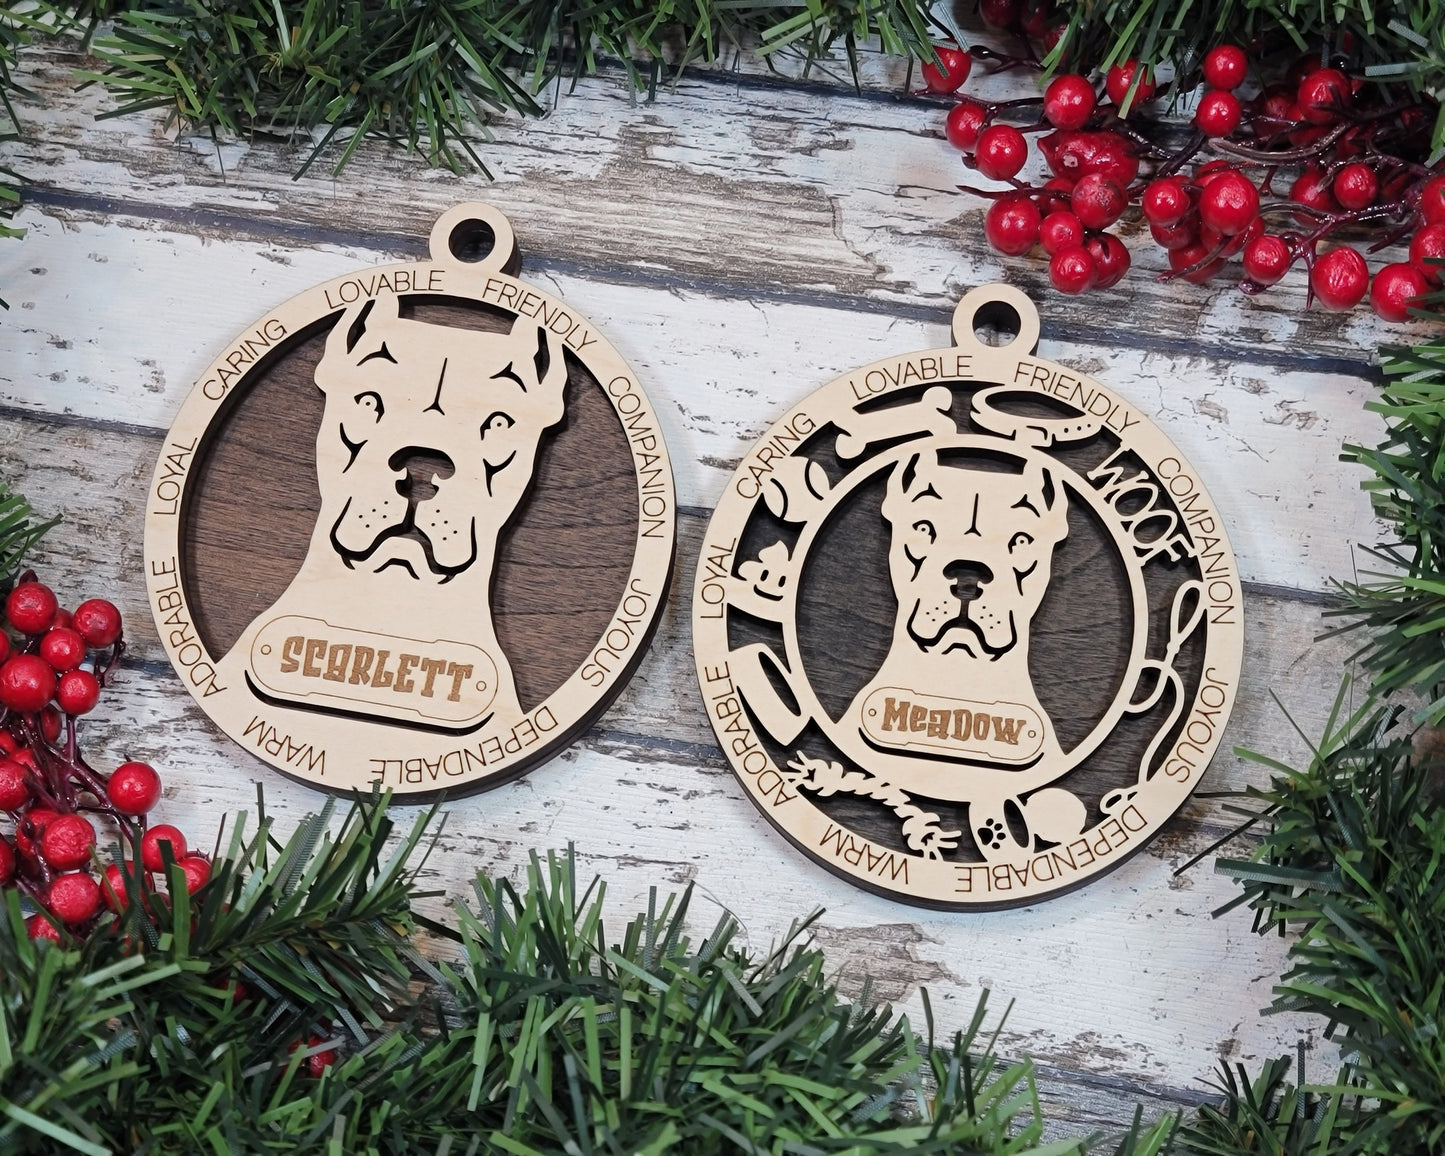 Dogo Argentino - Adorable Dog Ornaments - 2 Ornaments included - SVG, PDF, AI File Download - Sized for Glowforge